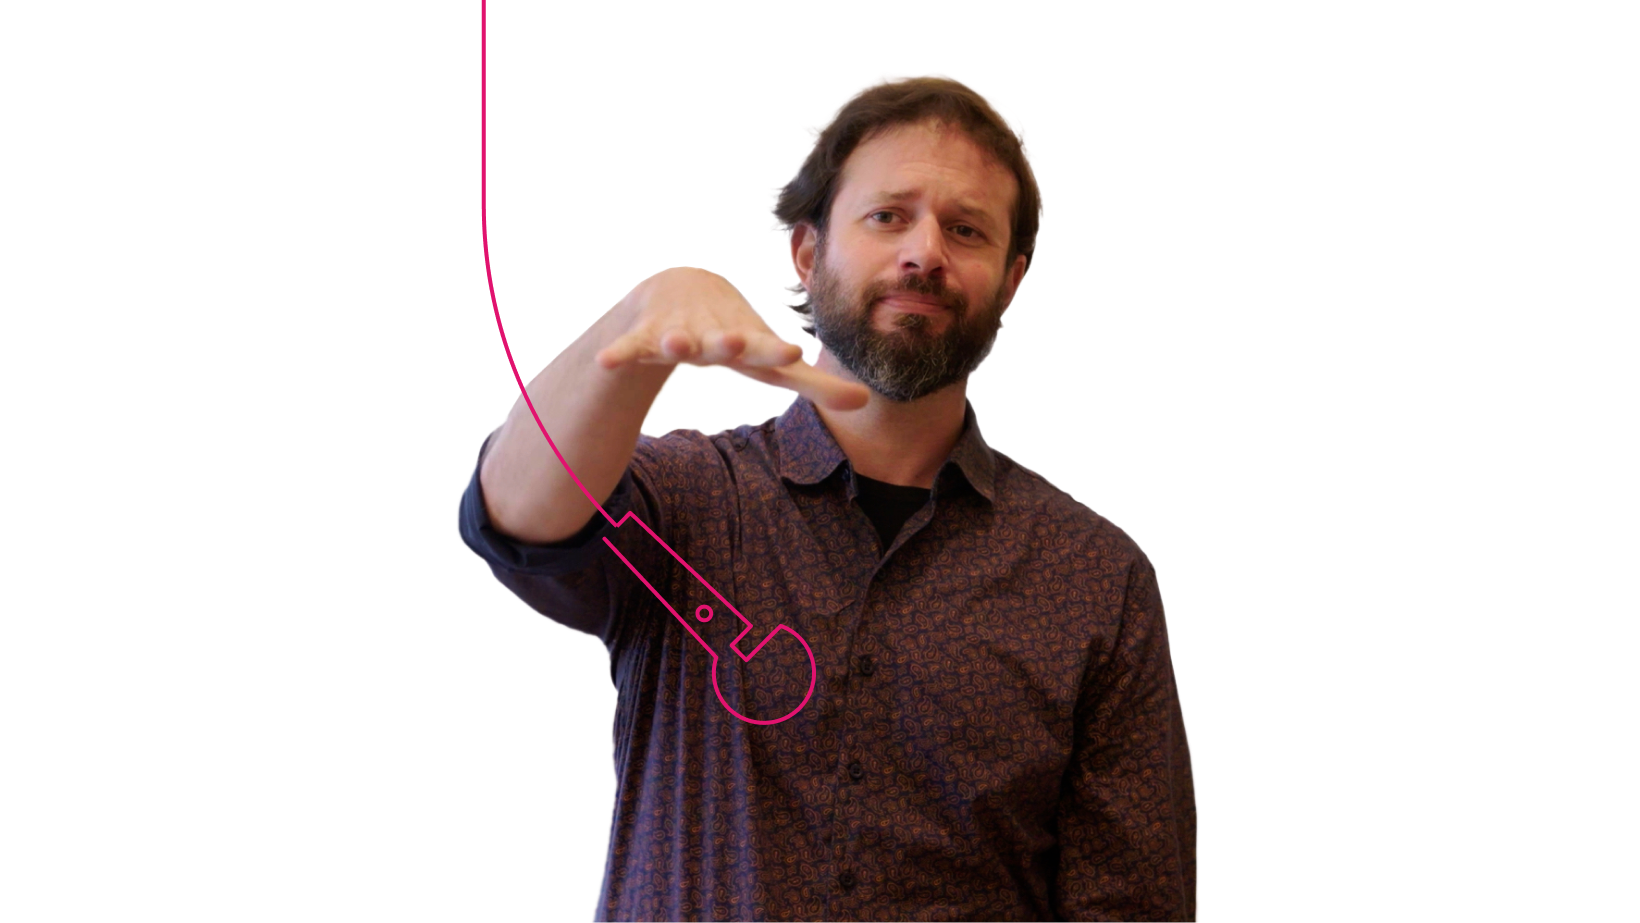 image of a person dropping a pink line art mic